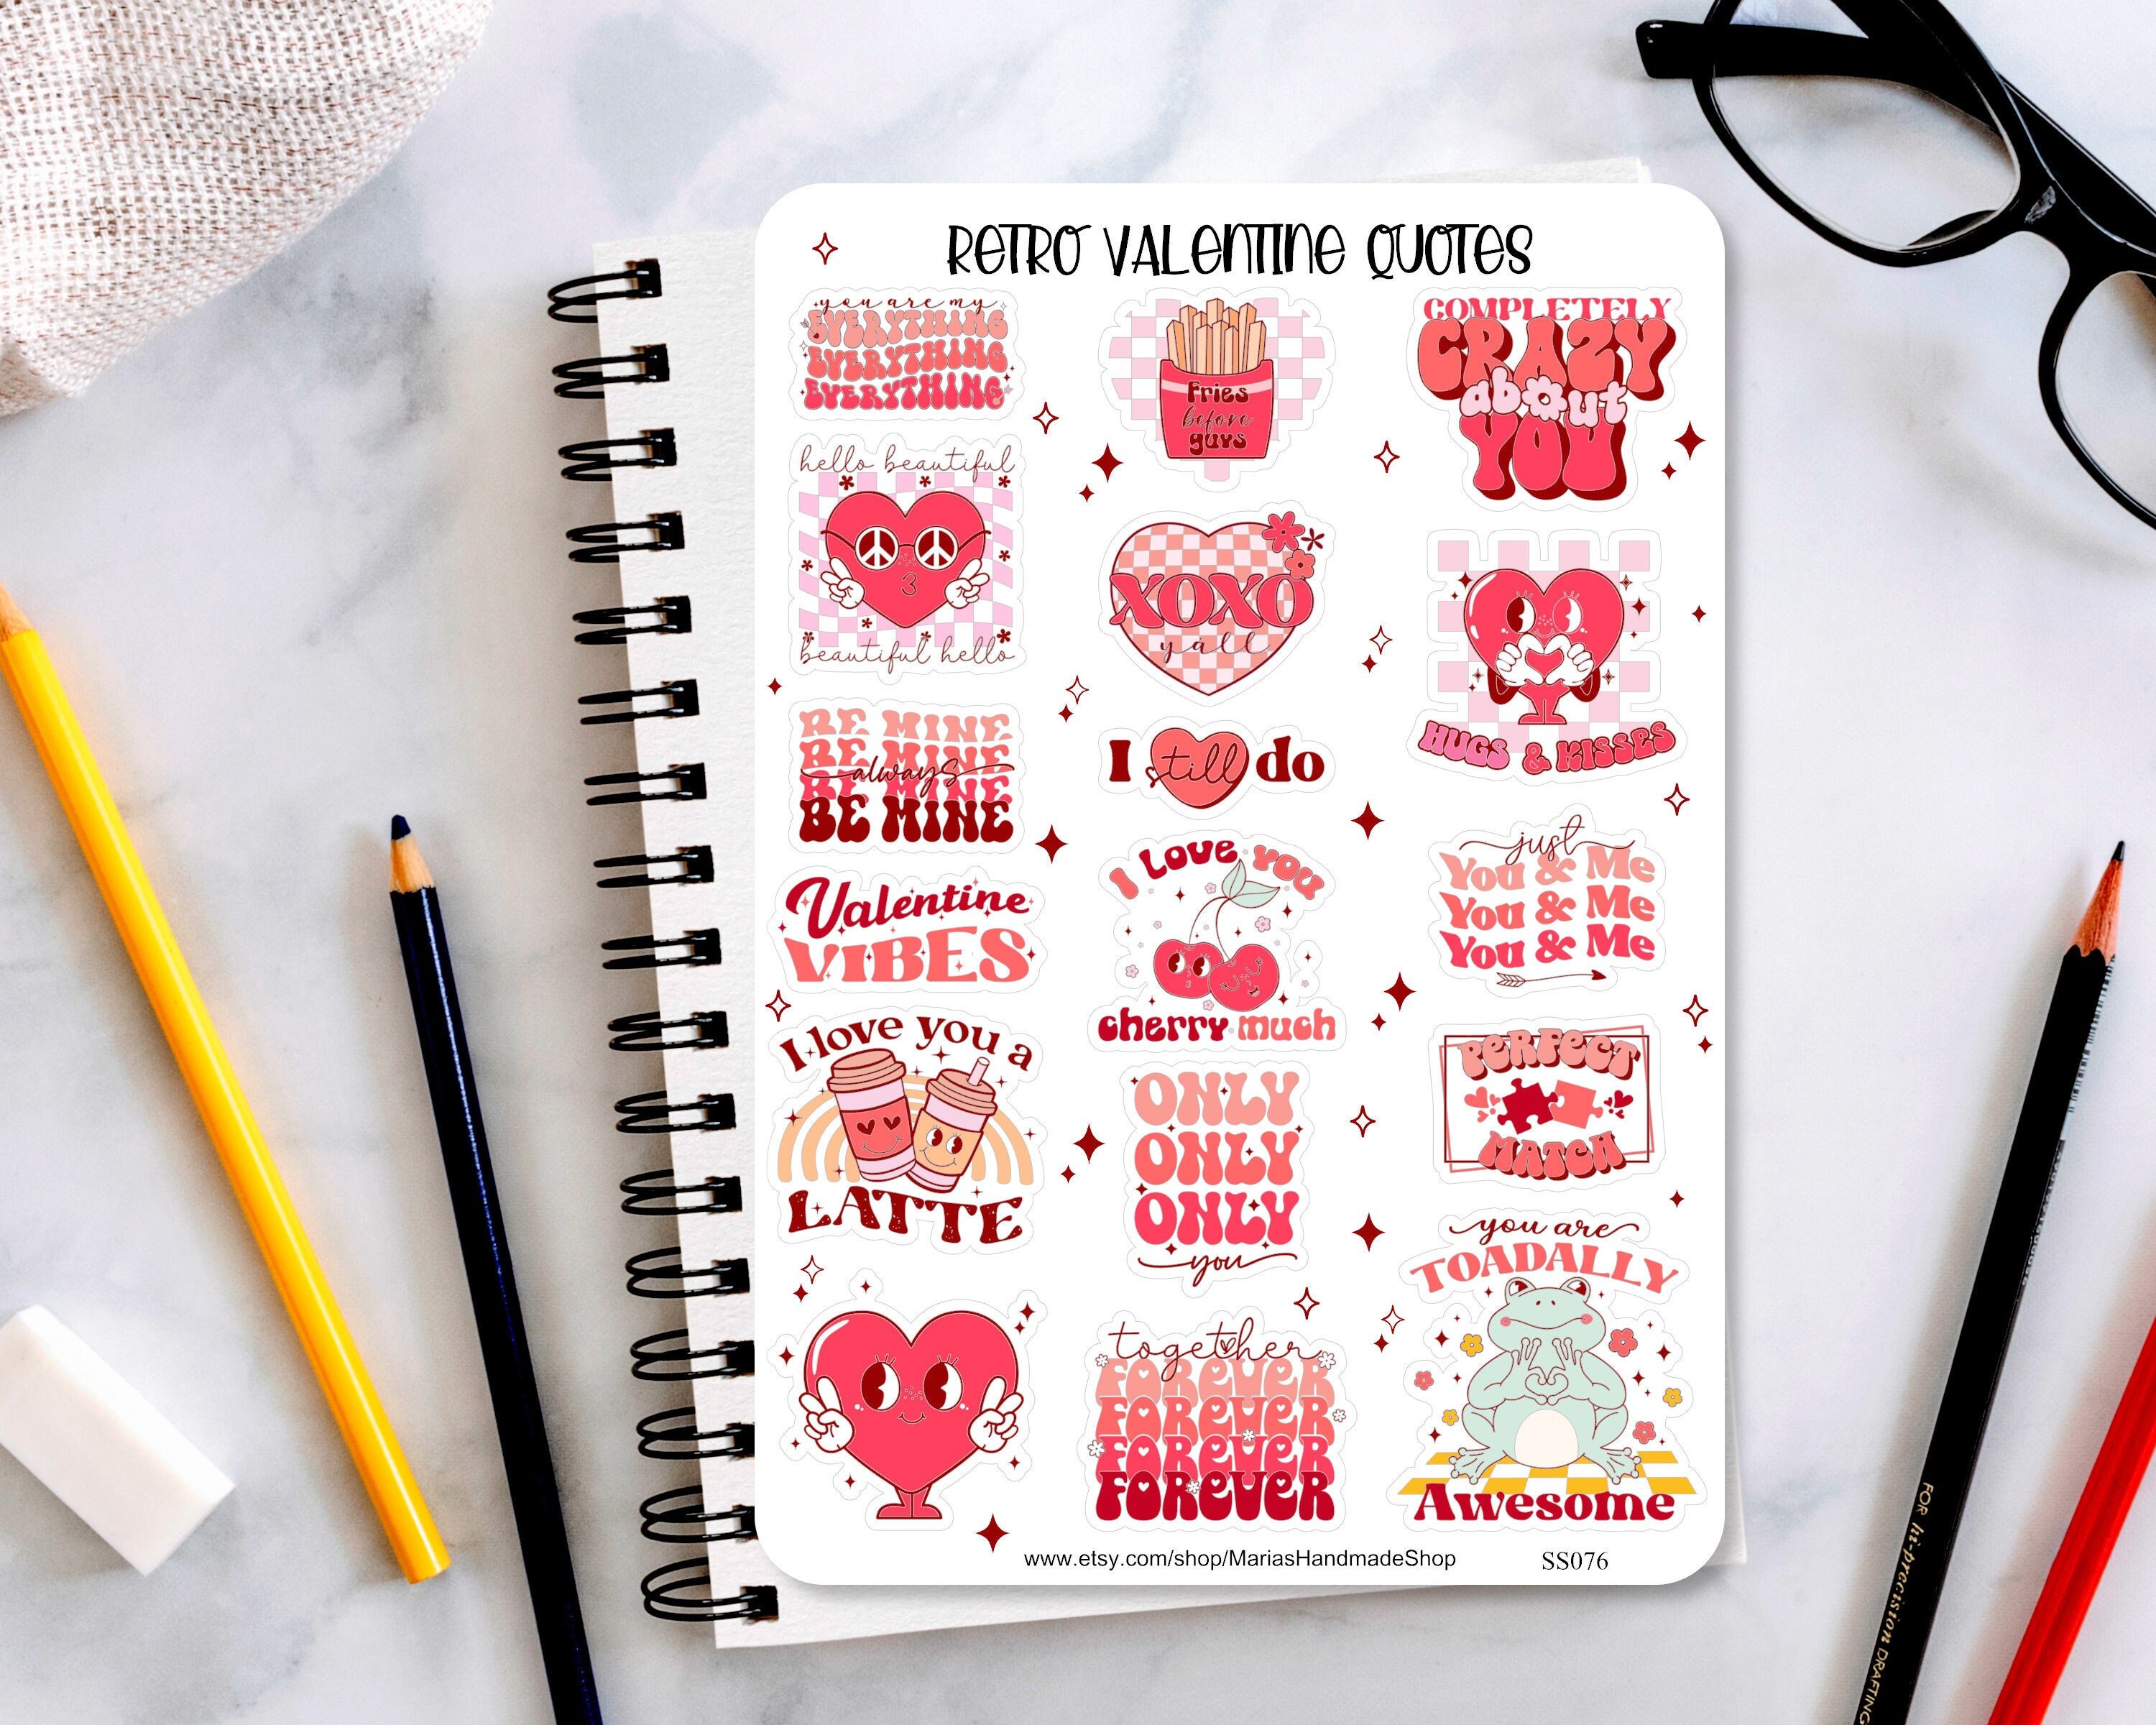 Inspirational Quote Stickers 100pcs, Motivational Stickers for Students,  Teachers Planner Stickers for Water Bottles, Scrapbooking, Journal 